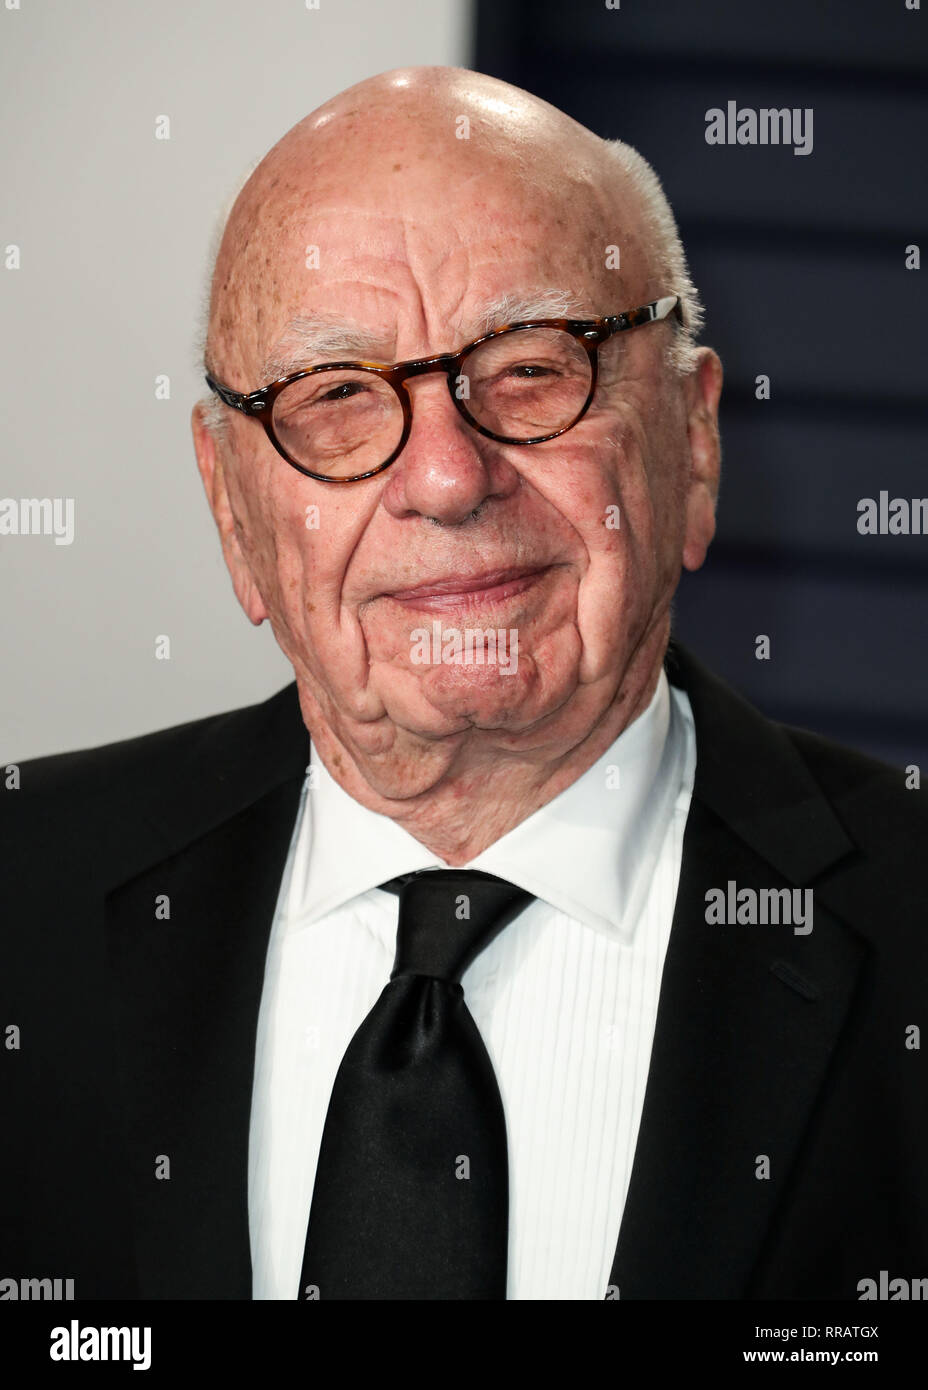 BEVERLY HILLS, LOS ANGELES, CA, USA - FEBRUARY 24: Rupert Murdoch arrives at the 2019 Vanity Fair Oscar Party held at the Wallis Annenberg Center for the Performing Arts on February 24, 2019 in Beverly Hills, Los Angeles, California, United States. (Photo by Xavier Collin/Image Press Agency) Stock Photo